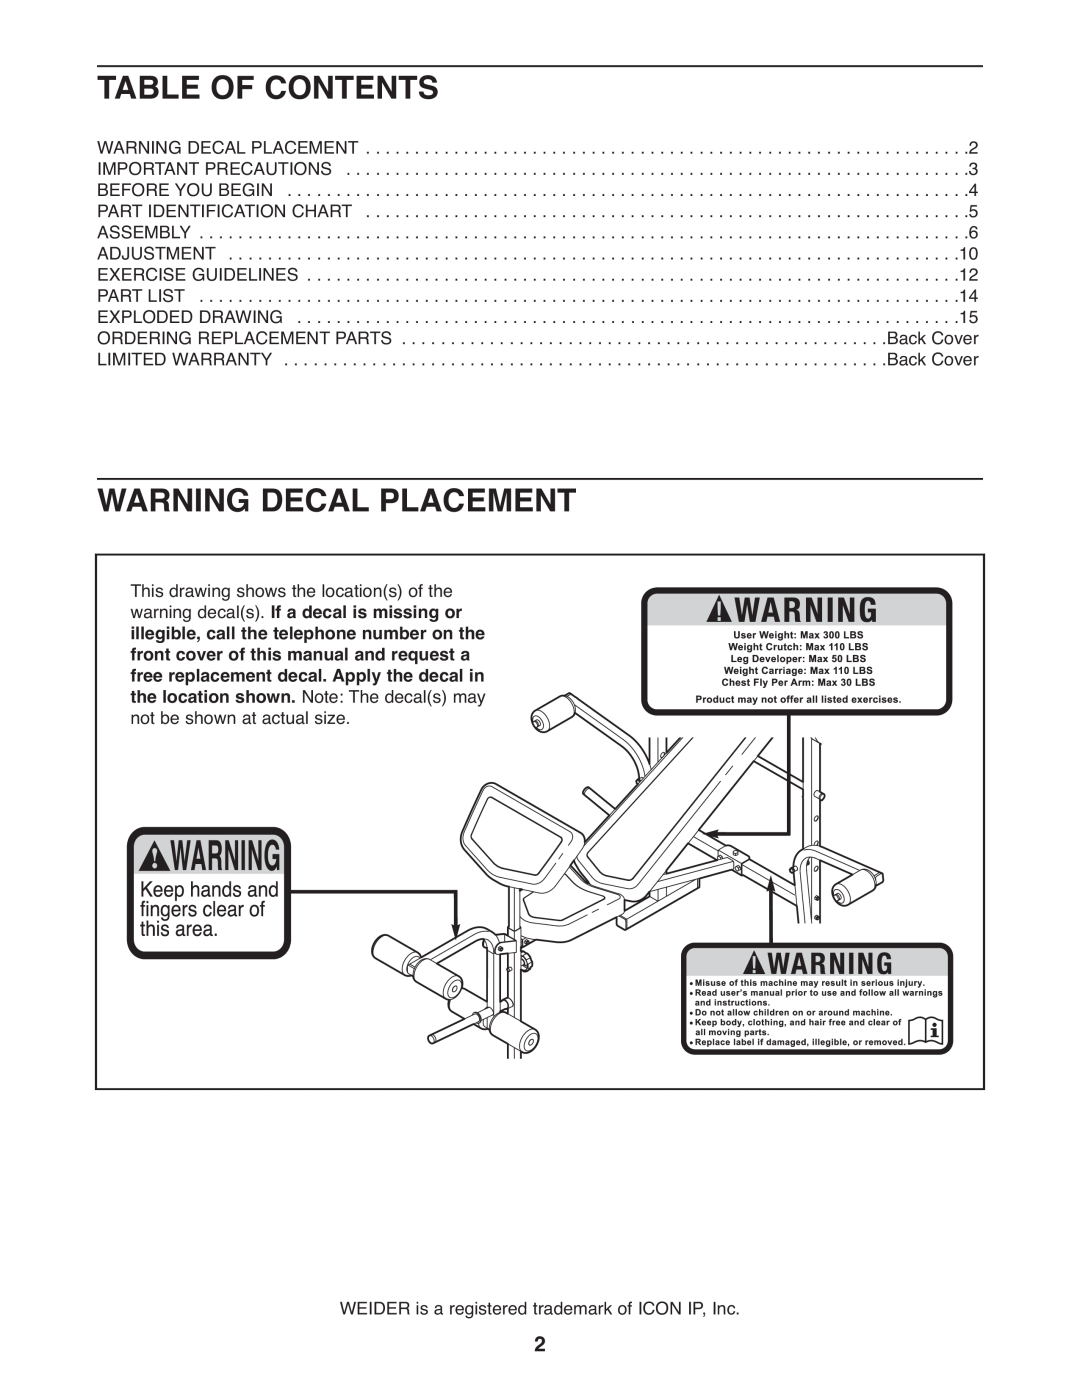 Weider 831.15999.1 user manual Table Of Contents, Warning Decal Placement, WEIDER is a registered trademark of ICON IP, Inc 